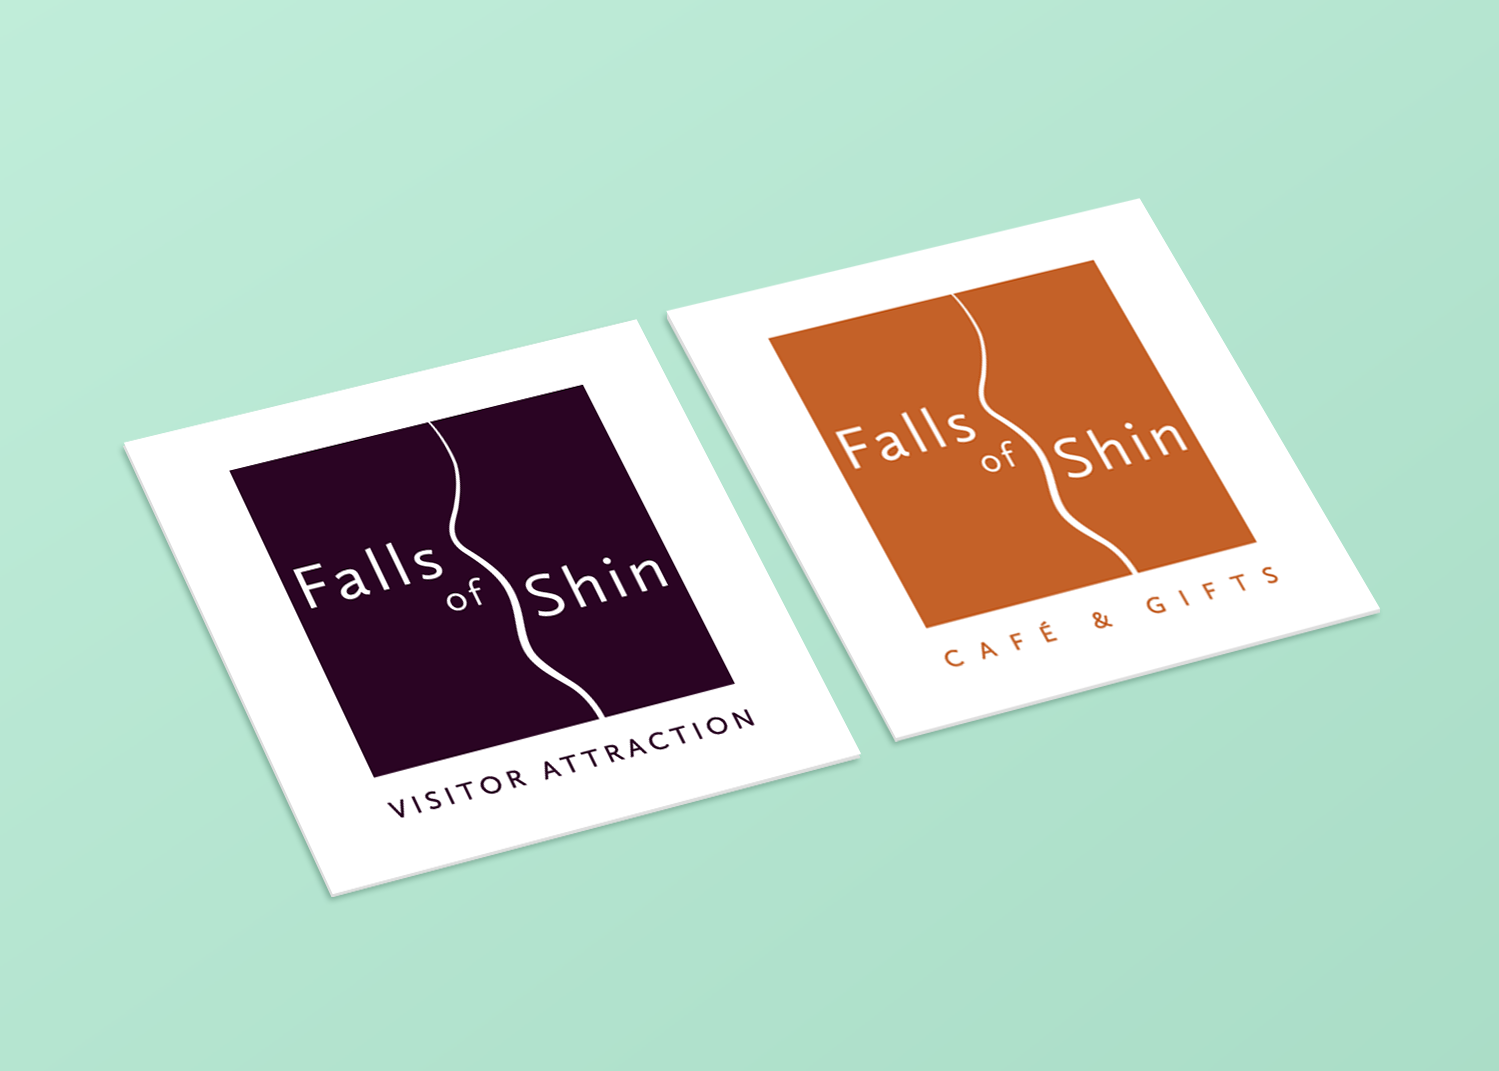 Falls of Shin Visitor Attraction and Cafe & Gifts Logos